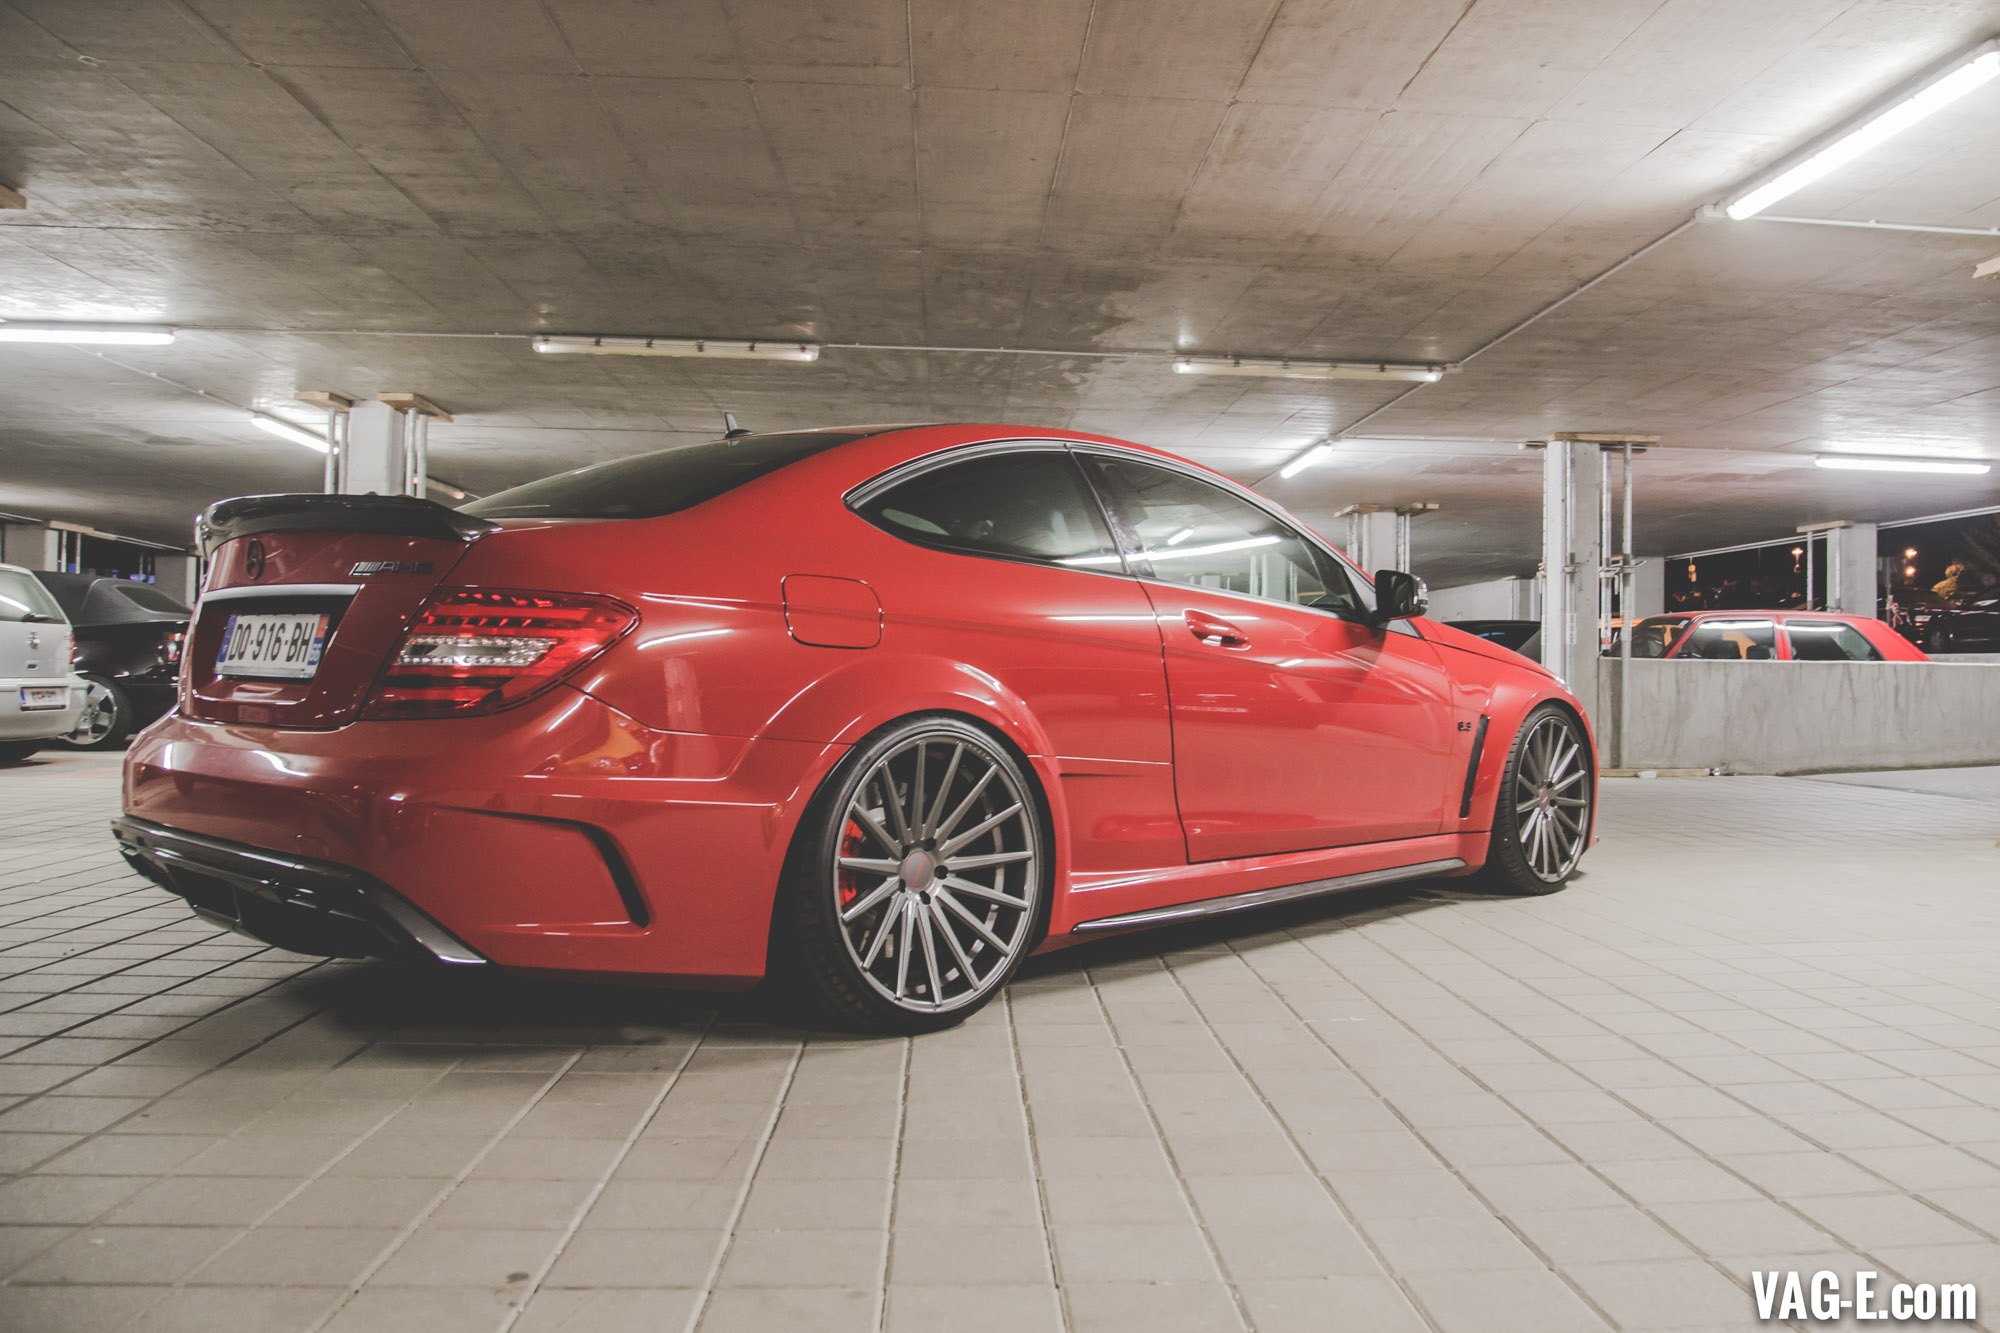 Rear Lip Spoiler on Red Mercedes C Class - Photo by Vossen